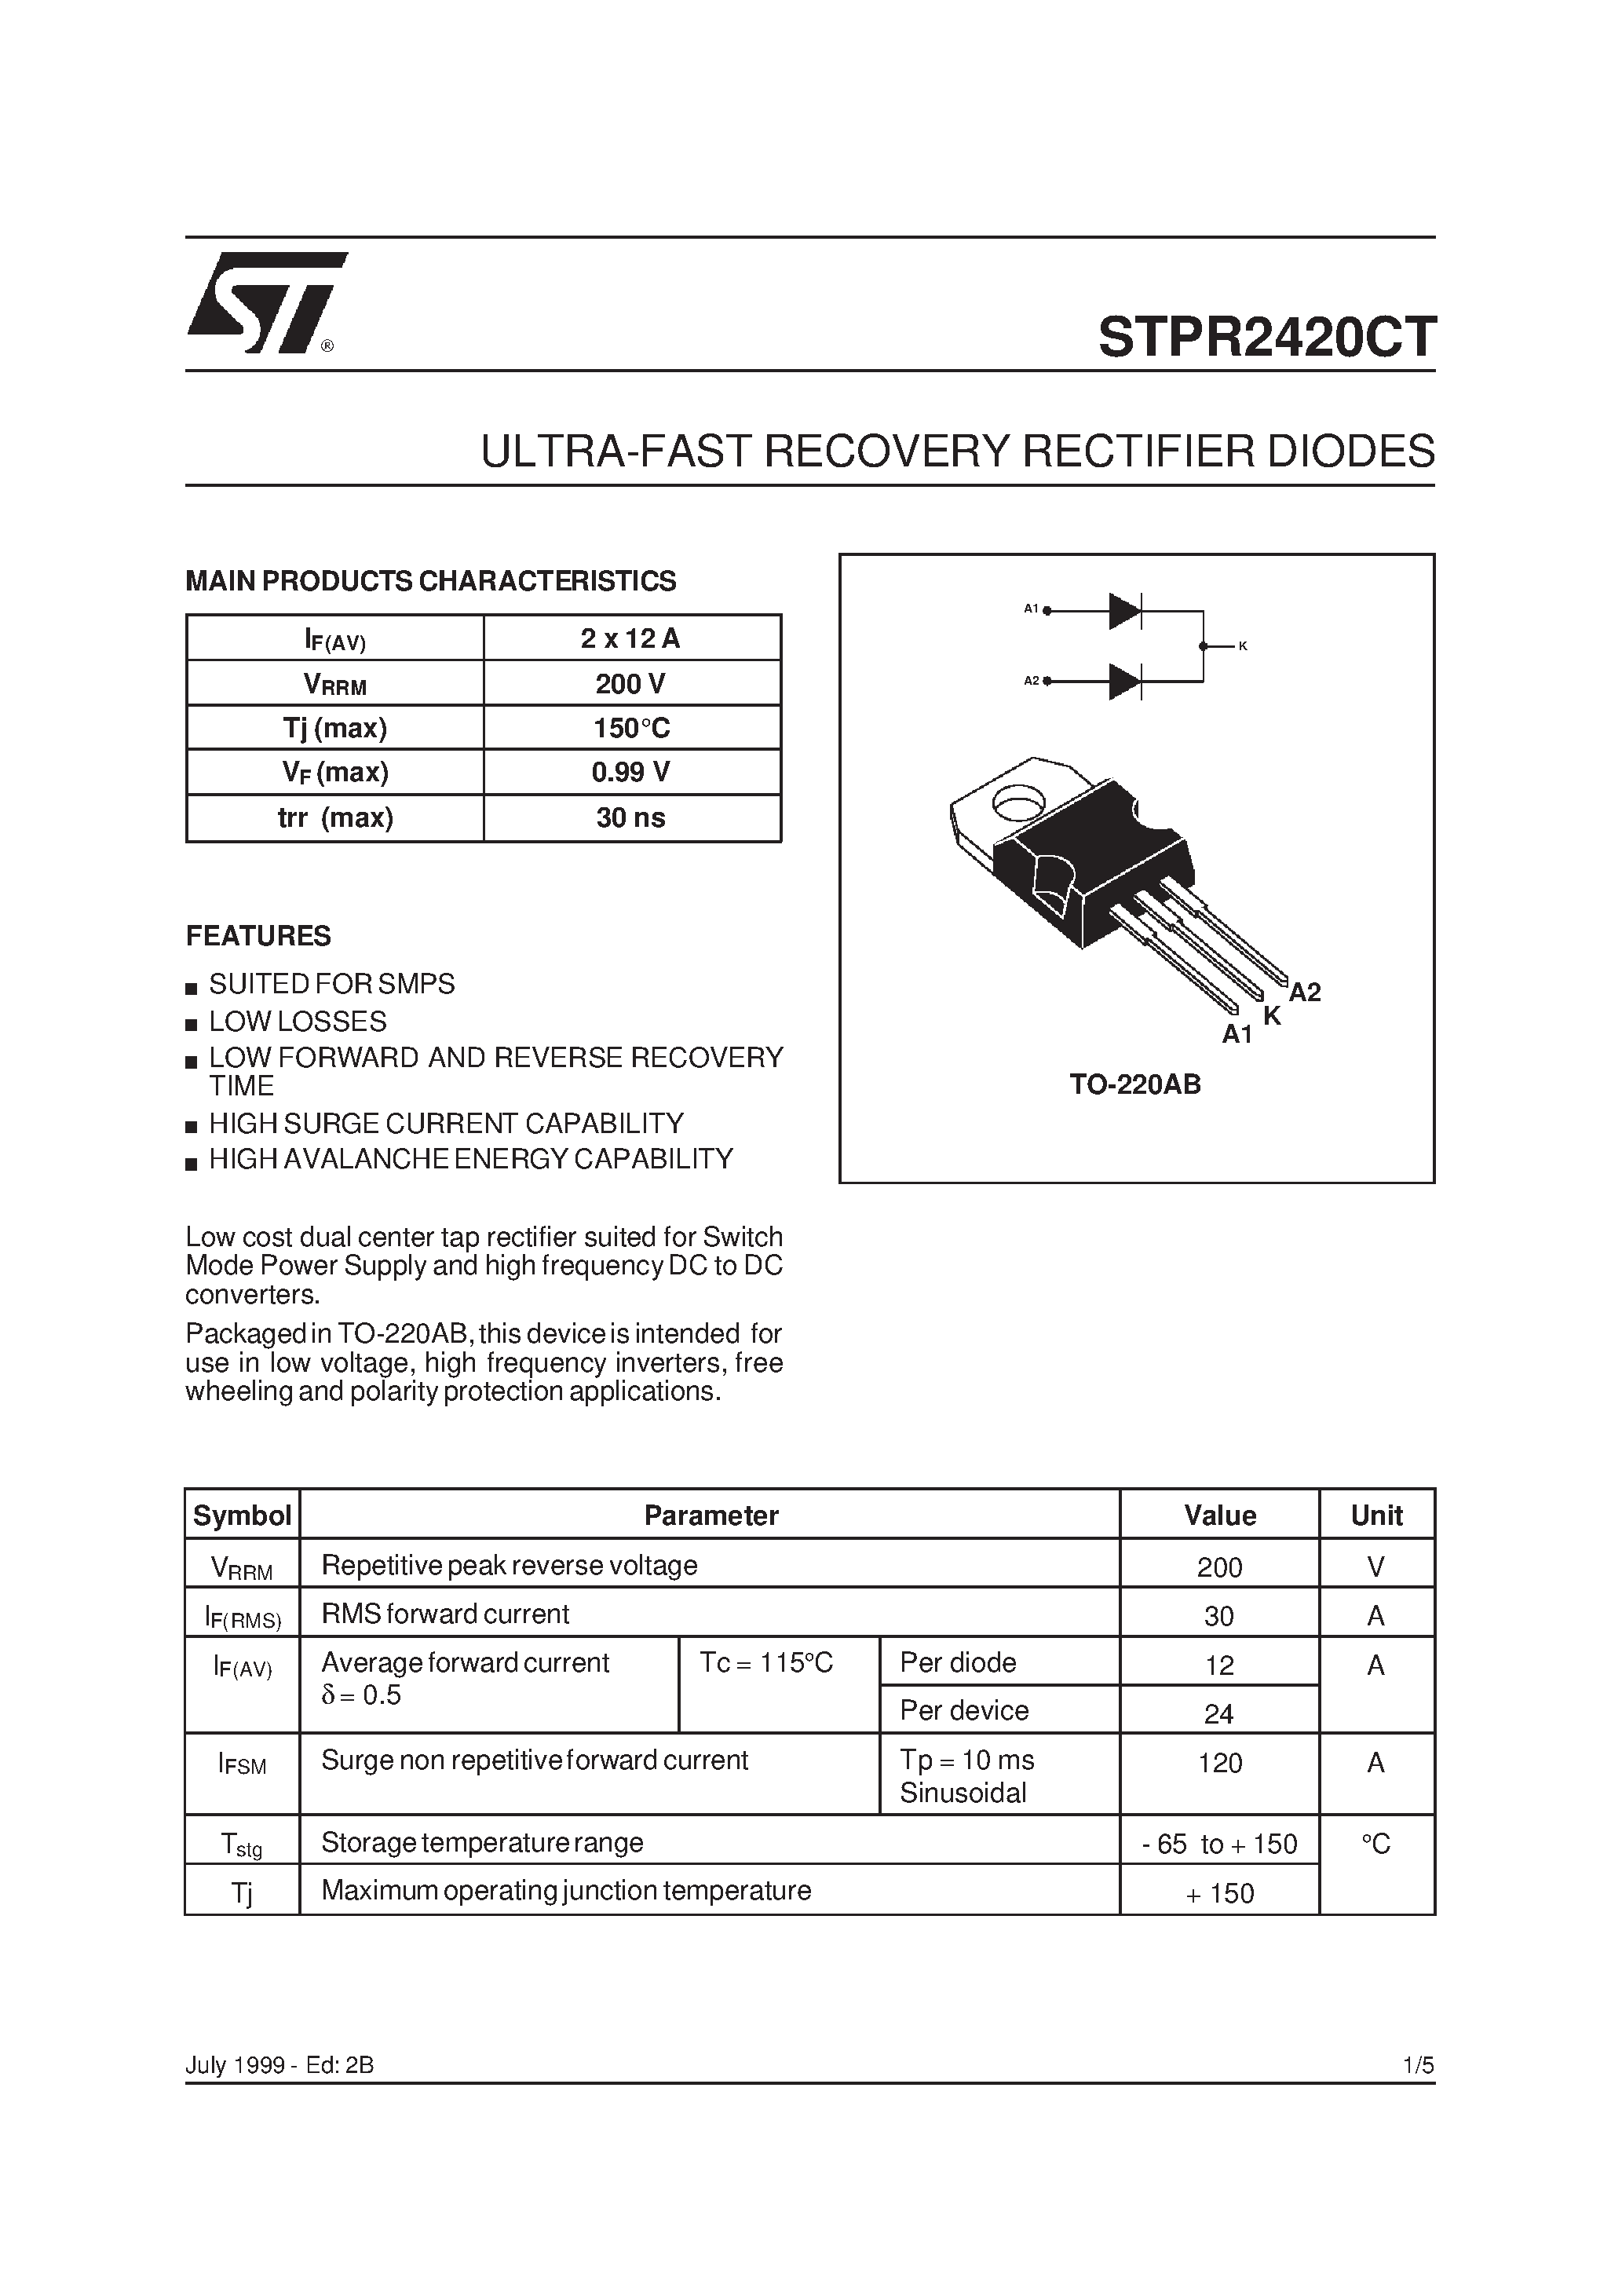 Datasheet STPR2420CT - ULTRA-FAST RECOVERY RECTIFIER DIODES page 1